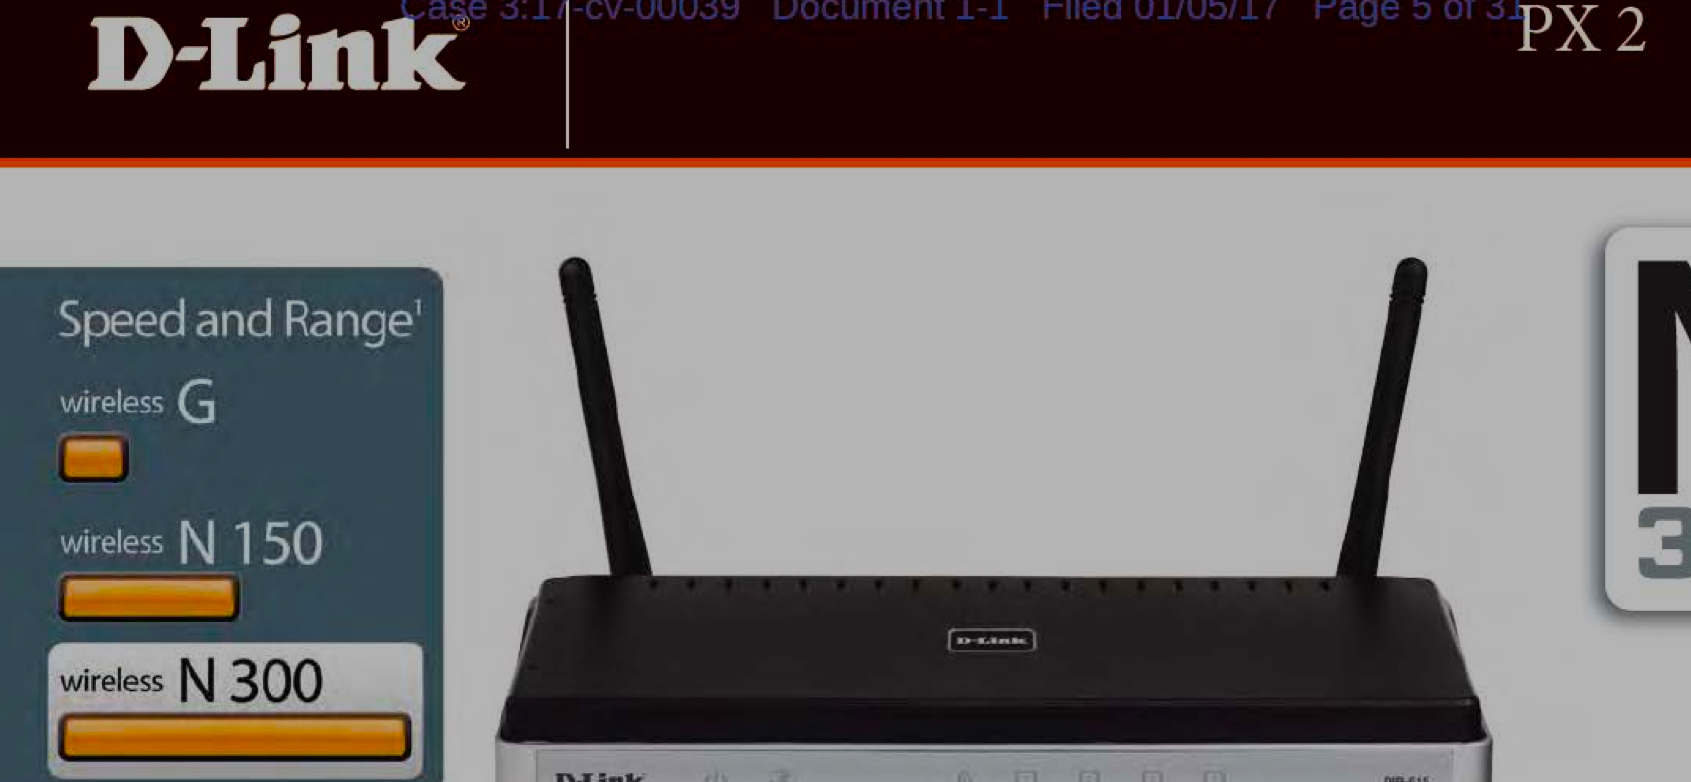 Feds Accuse D-Link Of Failing To Properly Secure Routers & Webcams